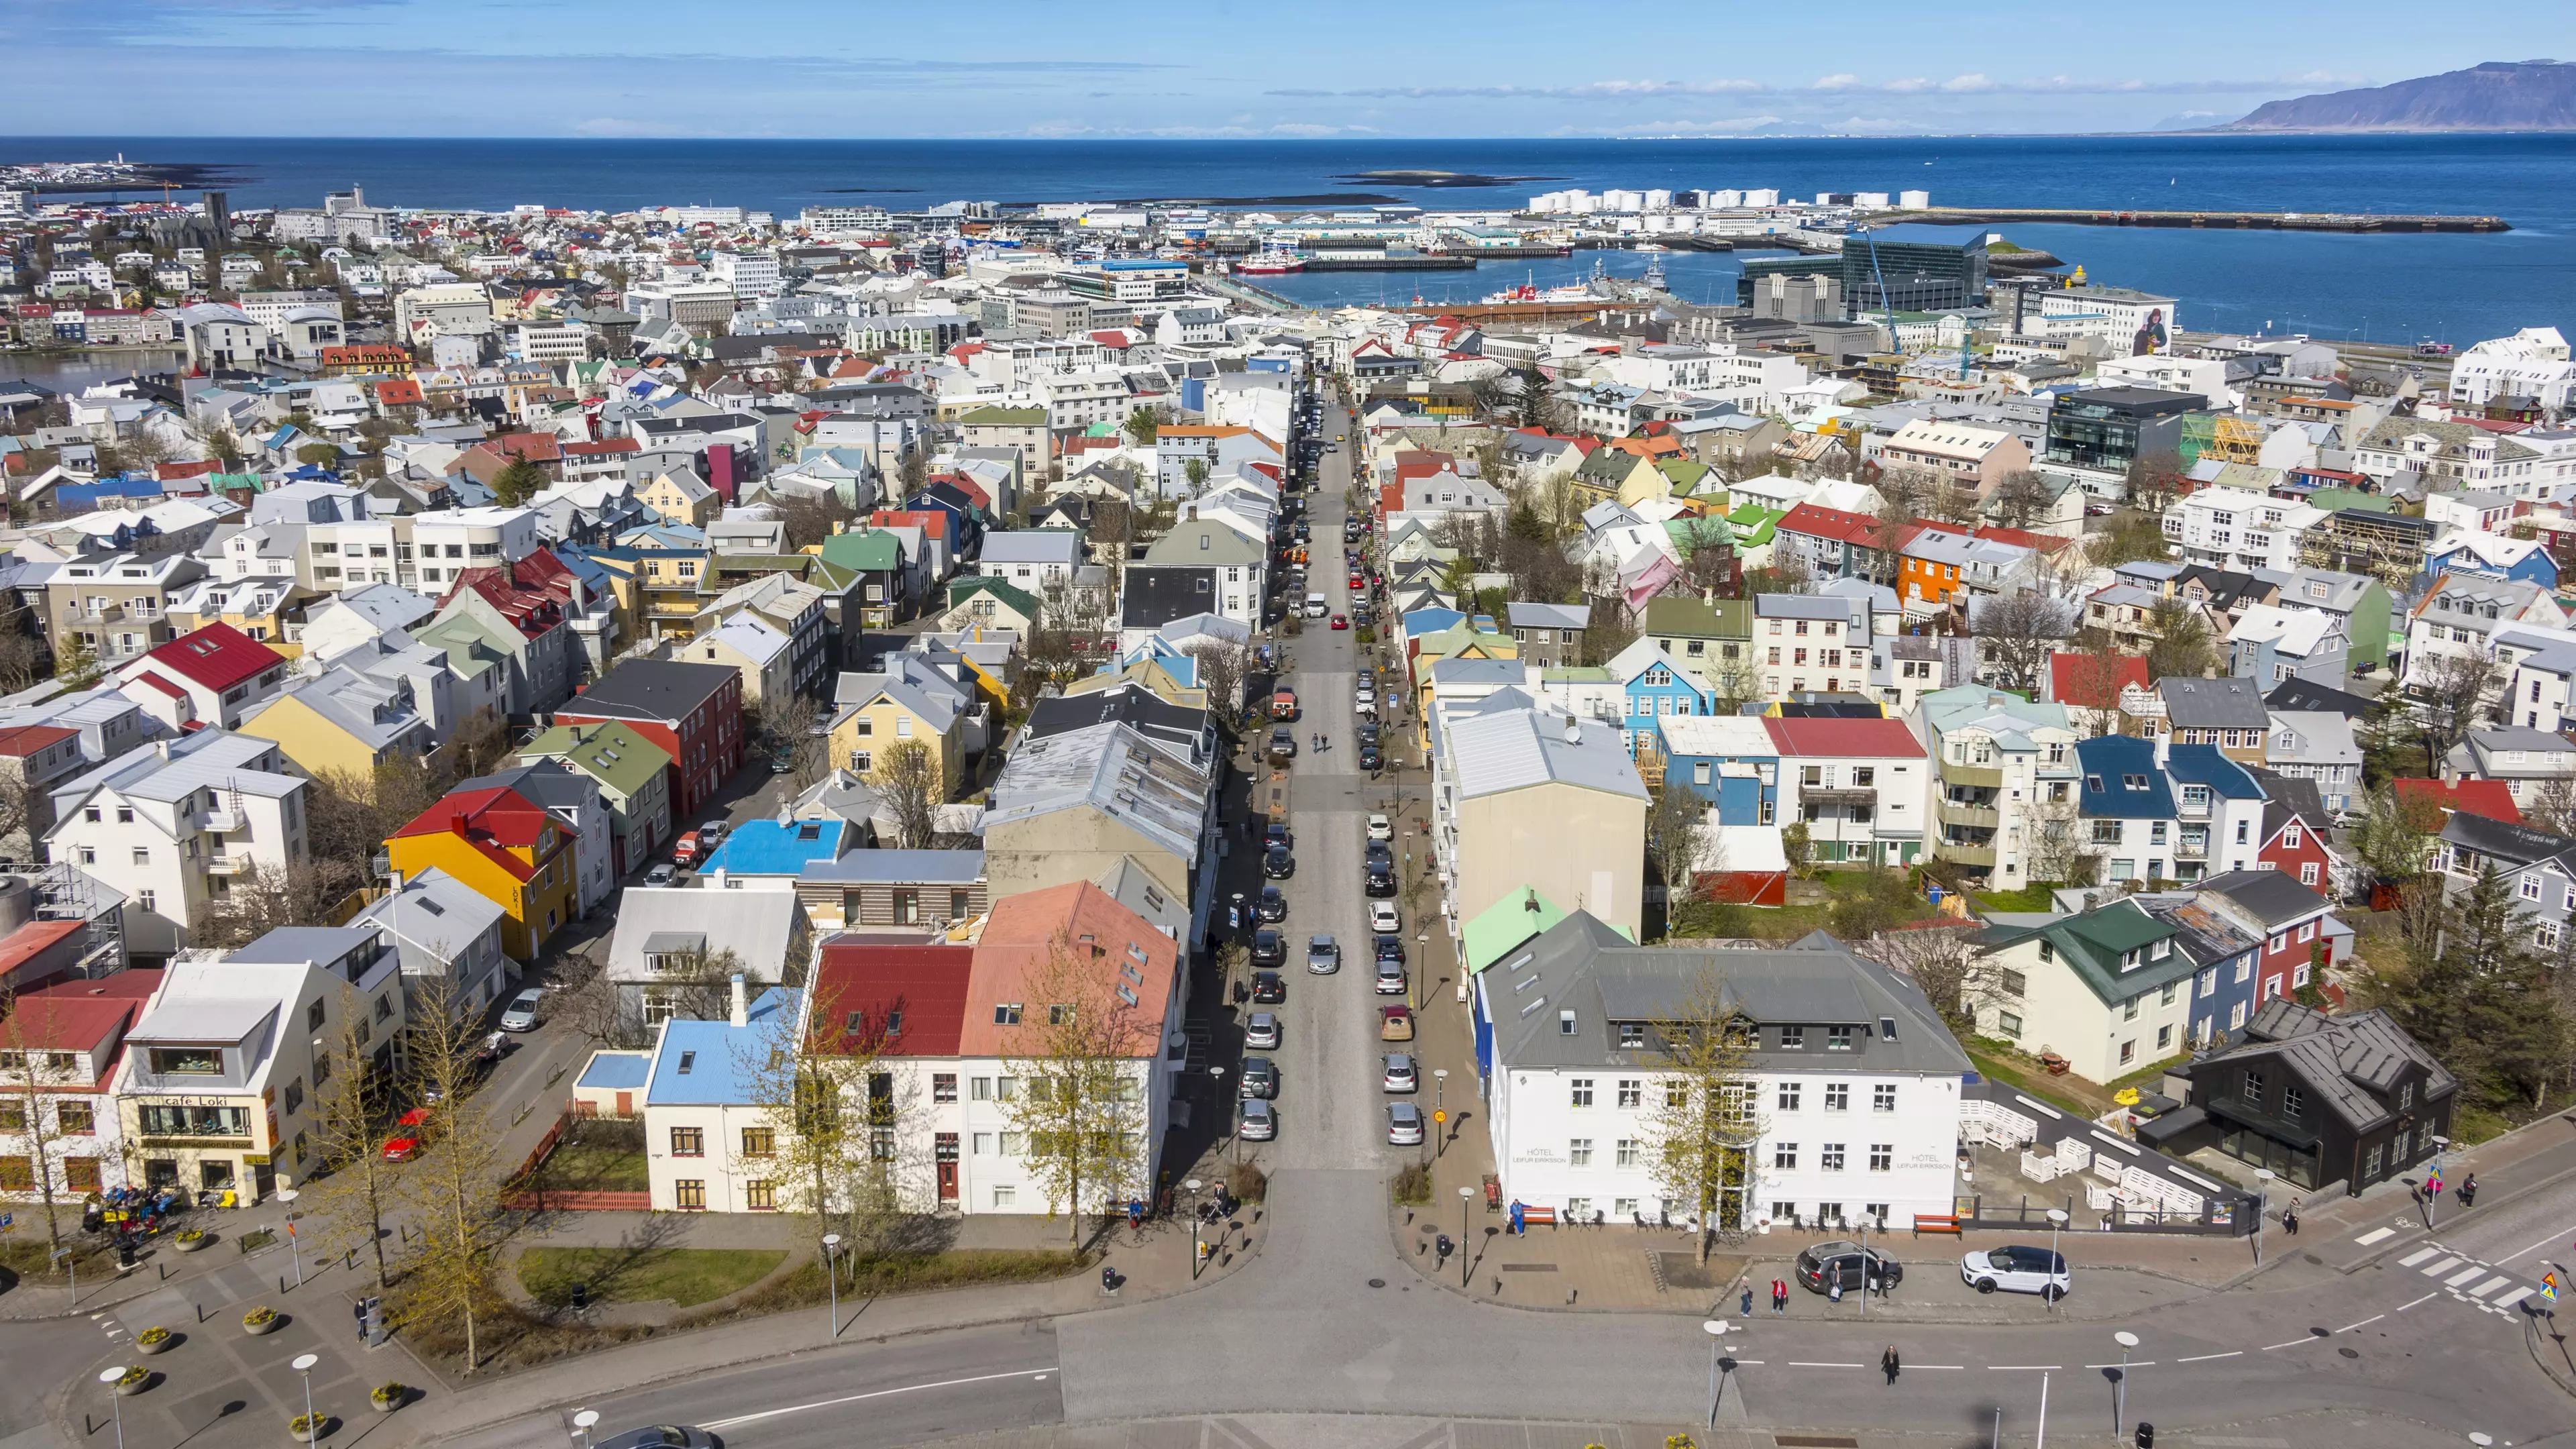 Iceland Offering Coronavirus Testing To All Residents, Even If They Have No Symptoms 